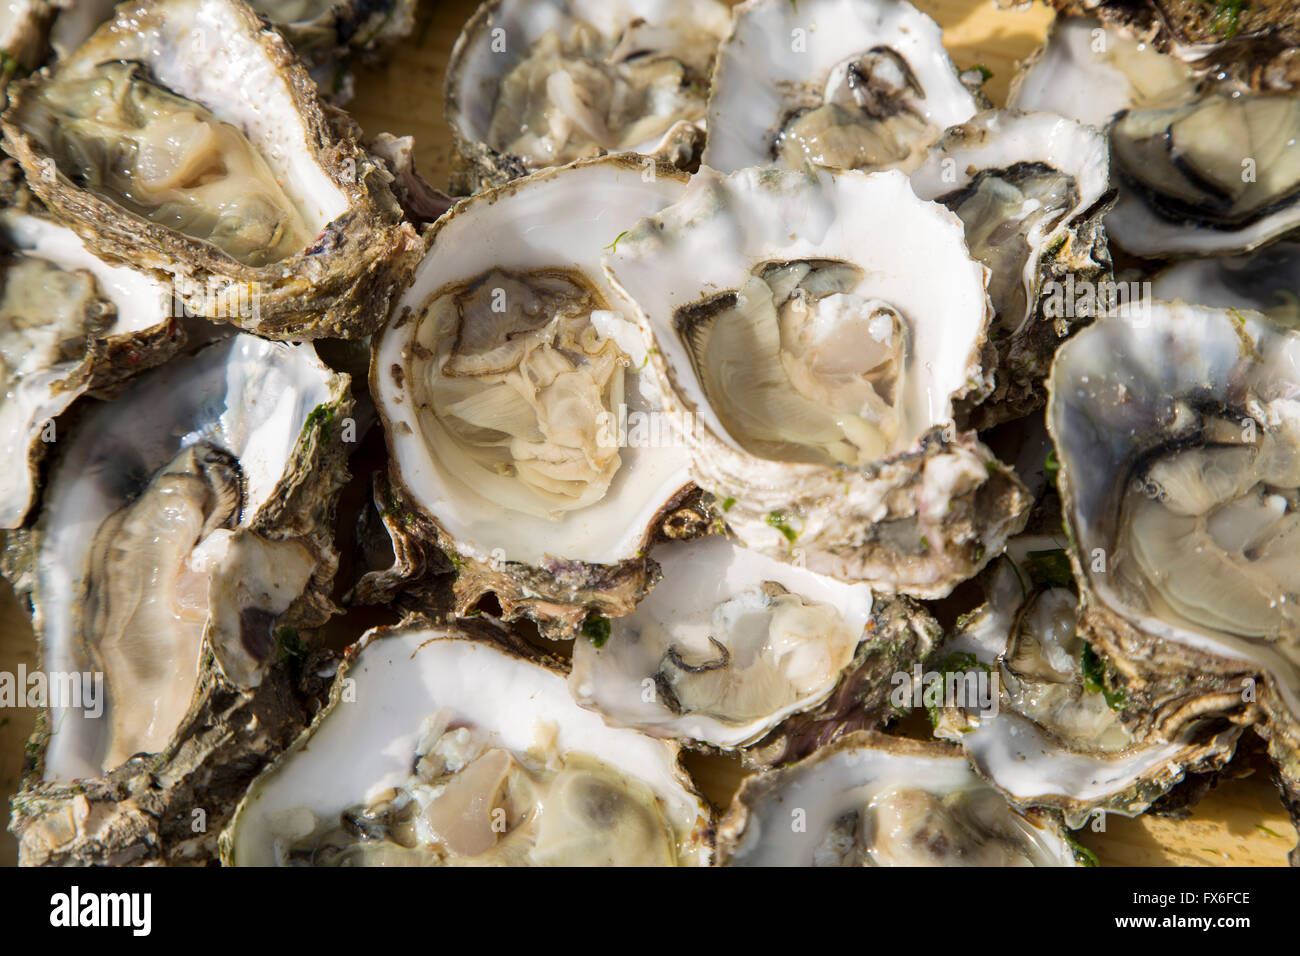 Typical ostiones. Oysters. Cadiz City, Andalusia Spain. Europe Stock Photo